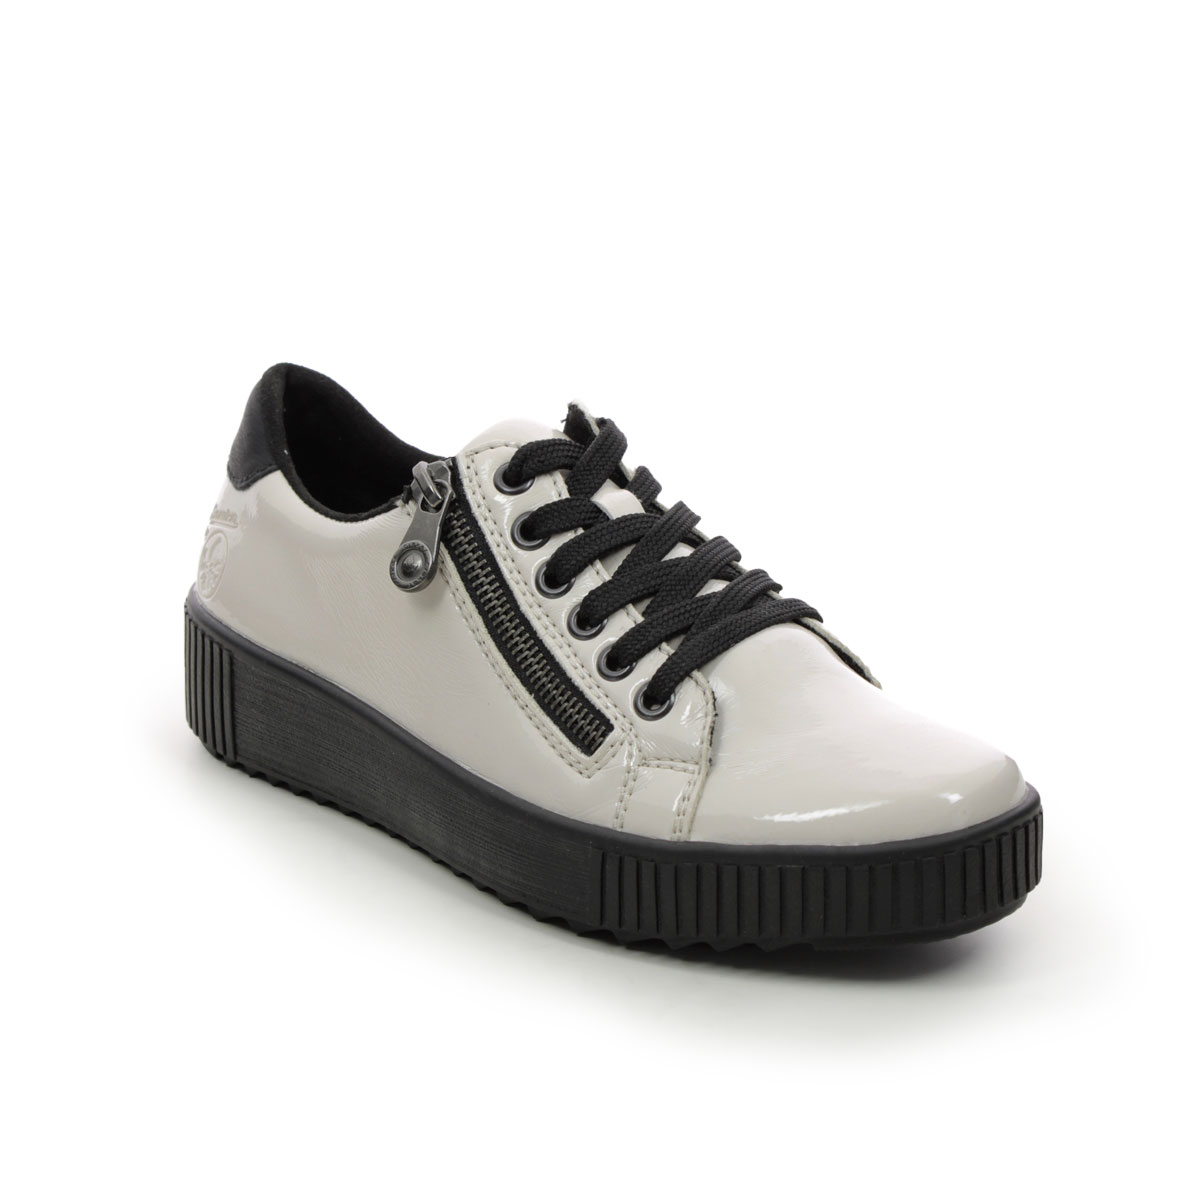 Rieker M6404-80 White Womens lacing shoes in a Plain Man-made in Size 37